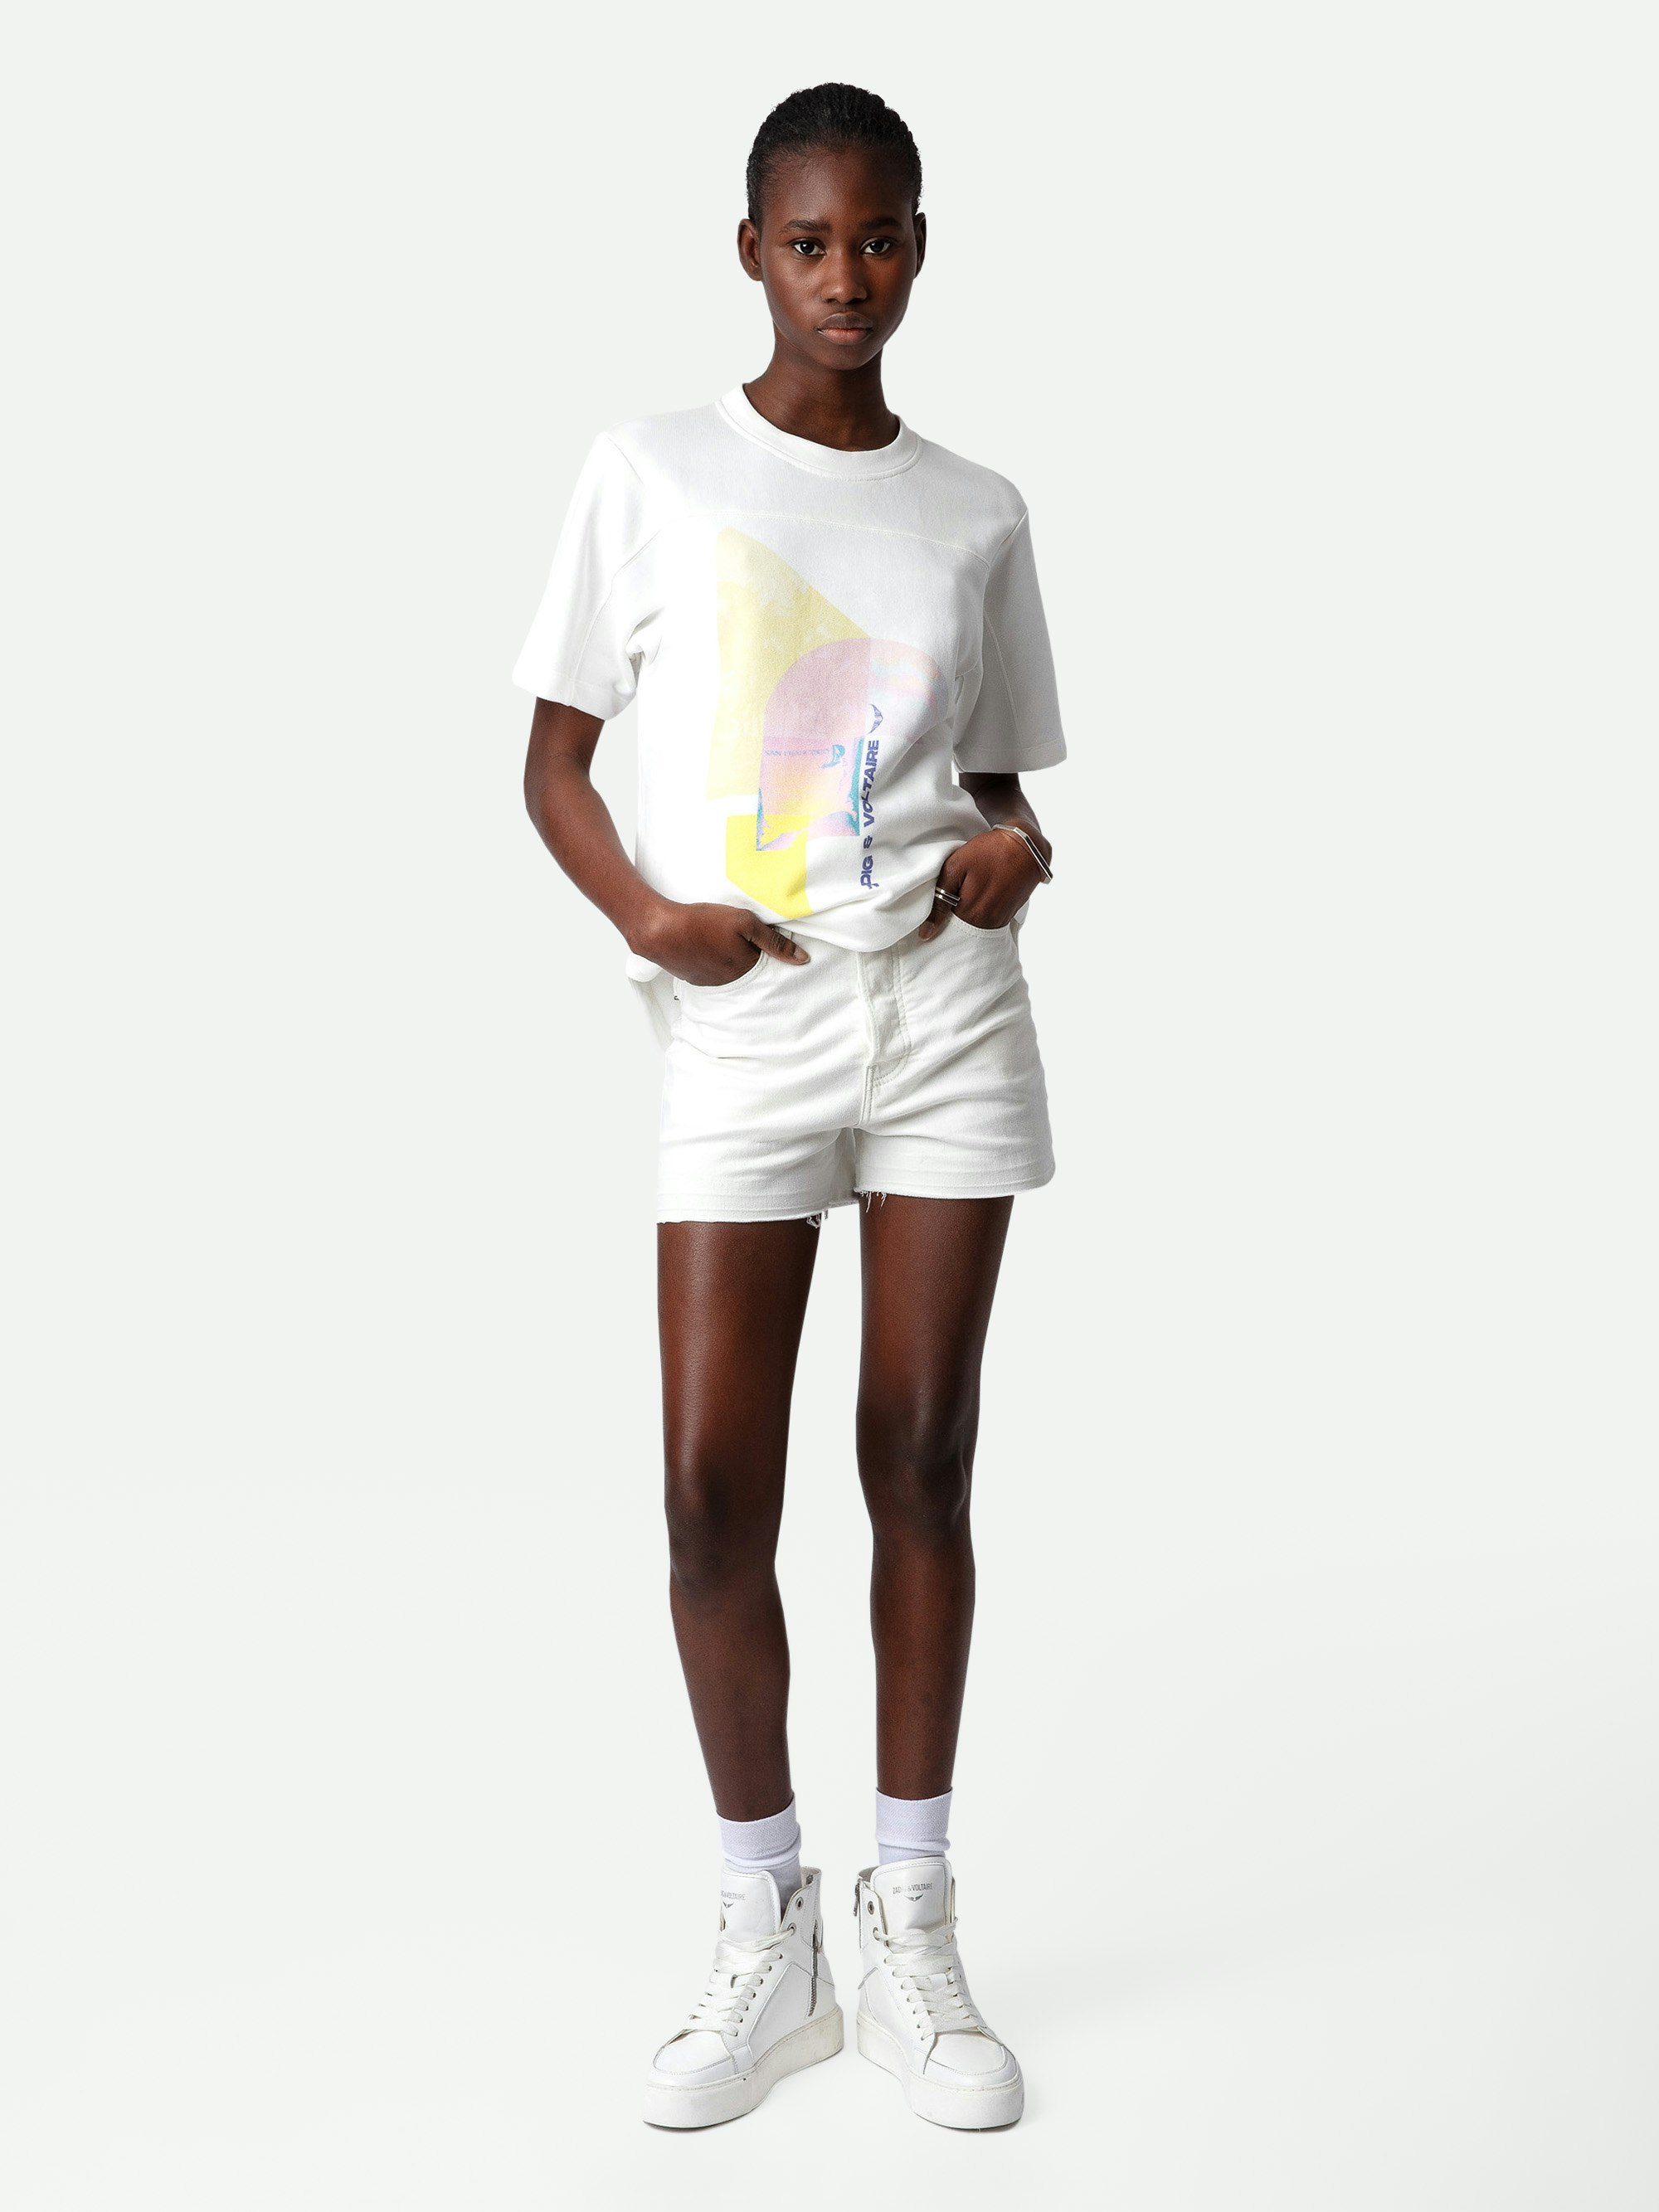 Bow T-shirt - White short-sleeved T-shirt with Terry Palmier print.